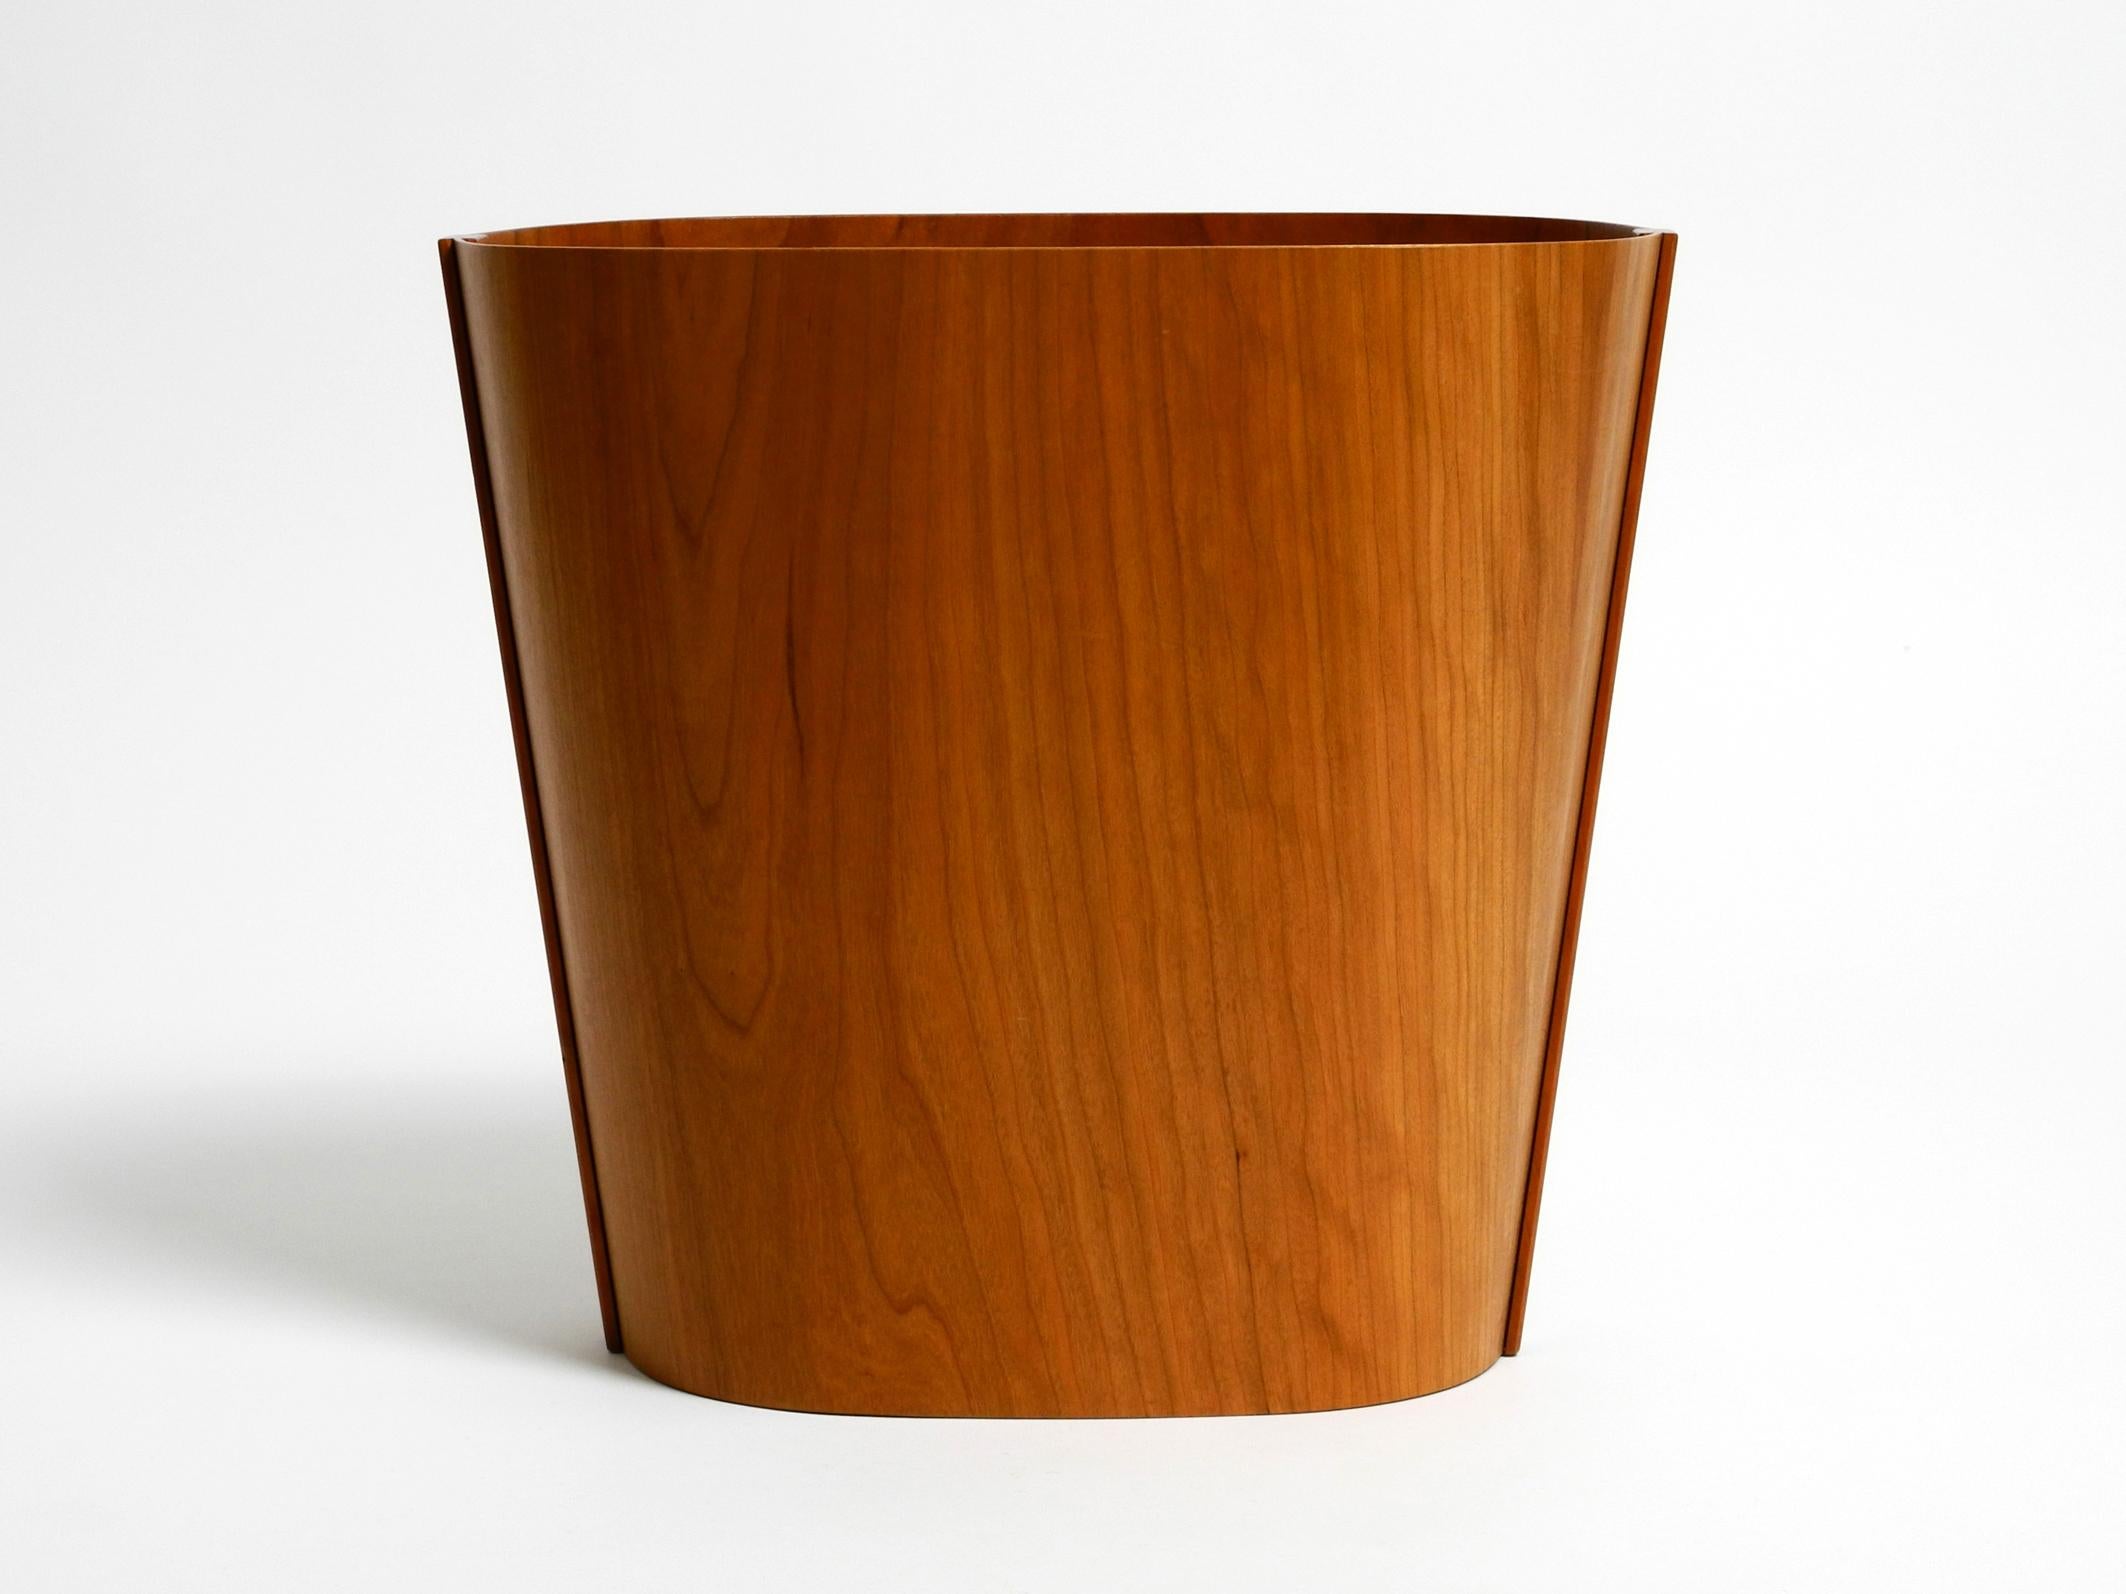 Rare beautiful Mid Century paper bin or basket made of bent teak wood.
Designed by Jan Nielsen for Beni Mobler. Made in Denmark.
With original stamp on the bottom.
Great minimalist 1960s design.
Made entirely of teak with a very beautiful